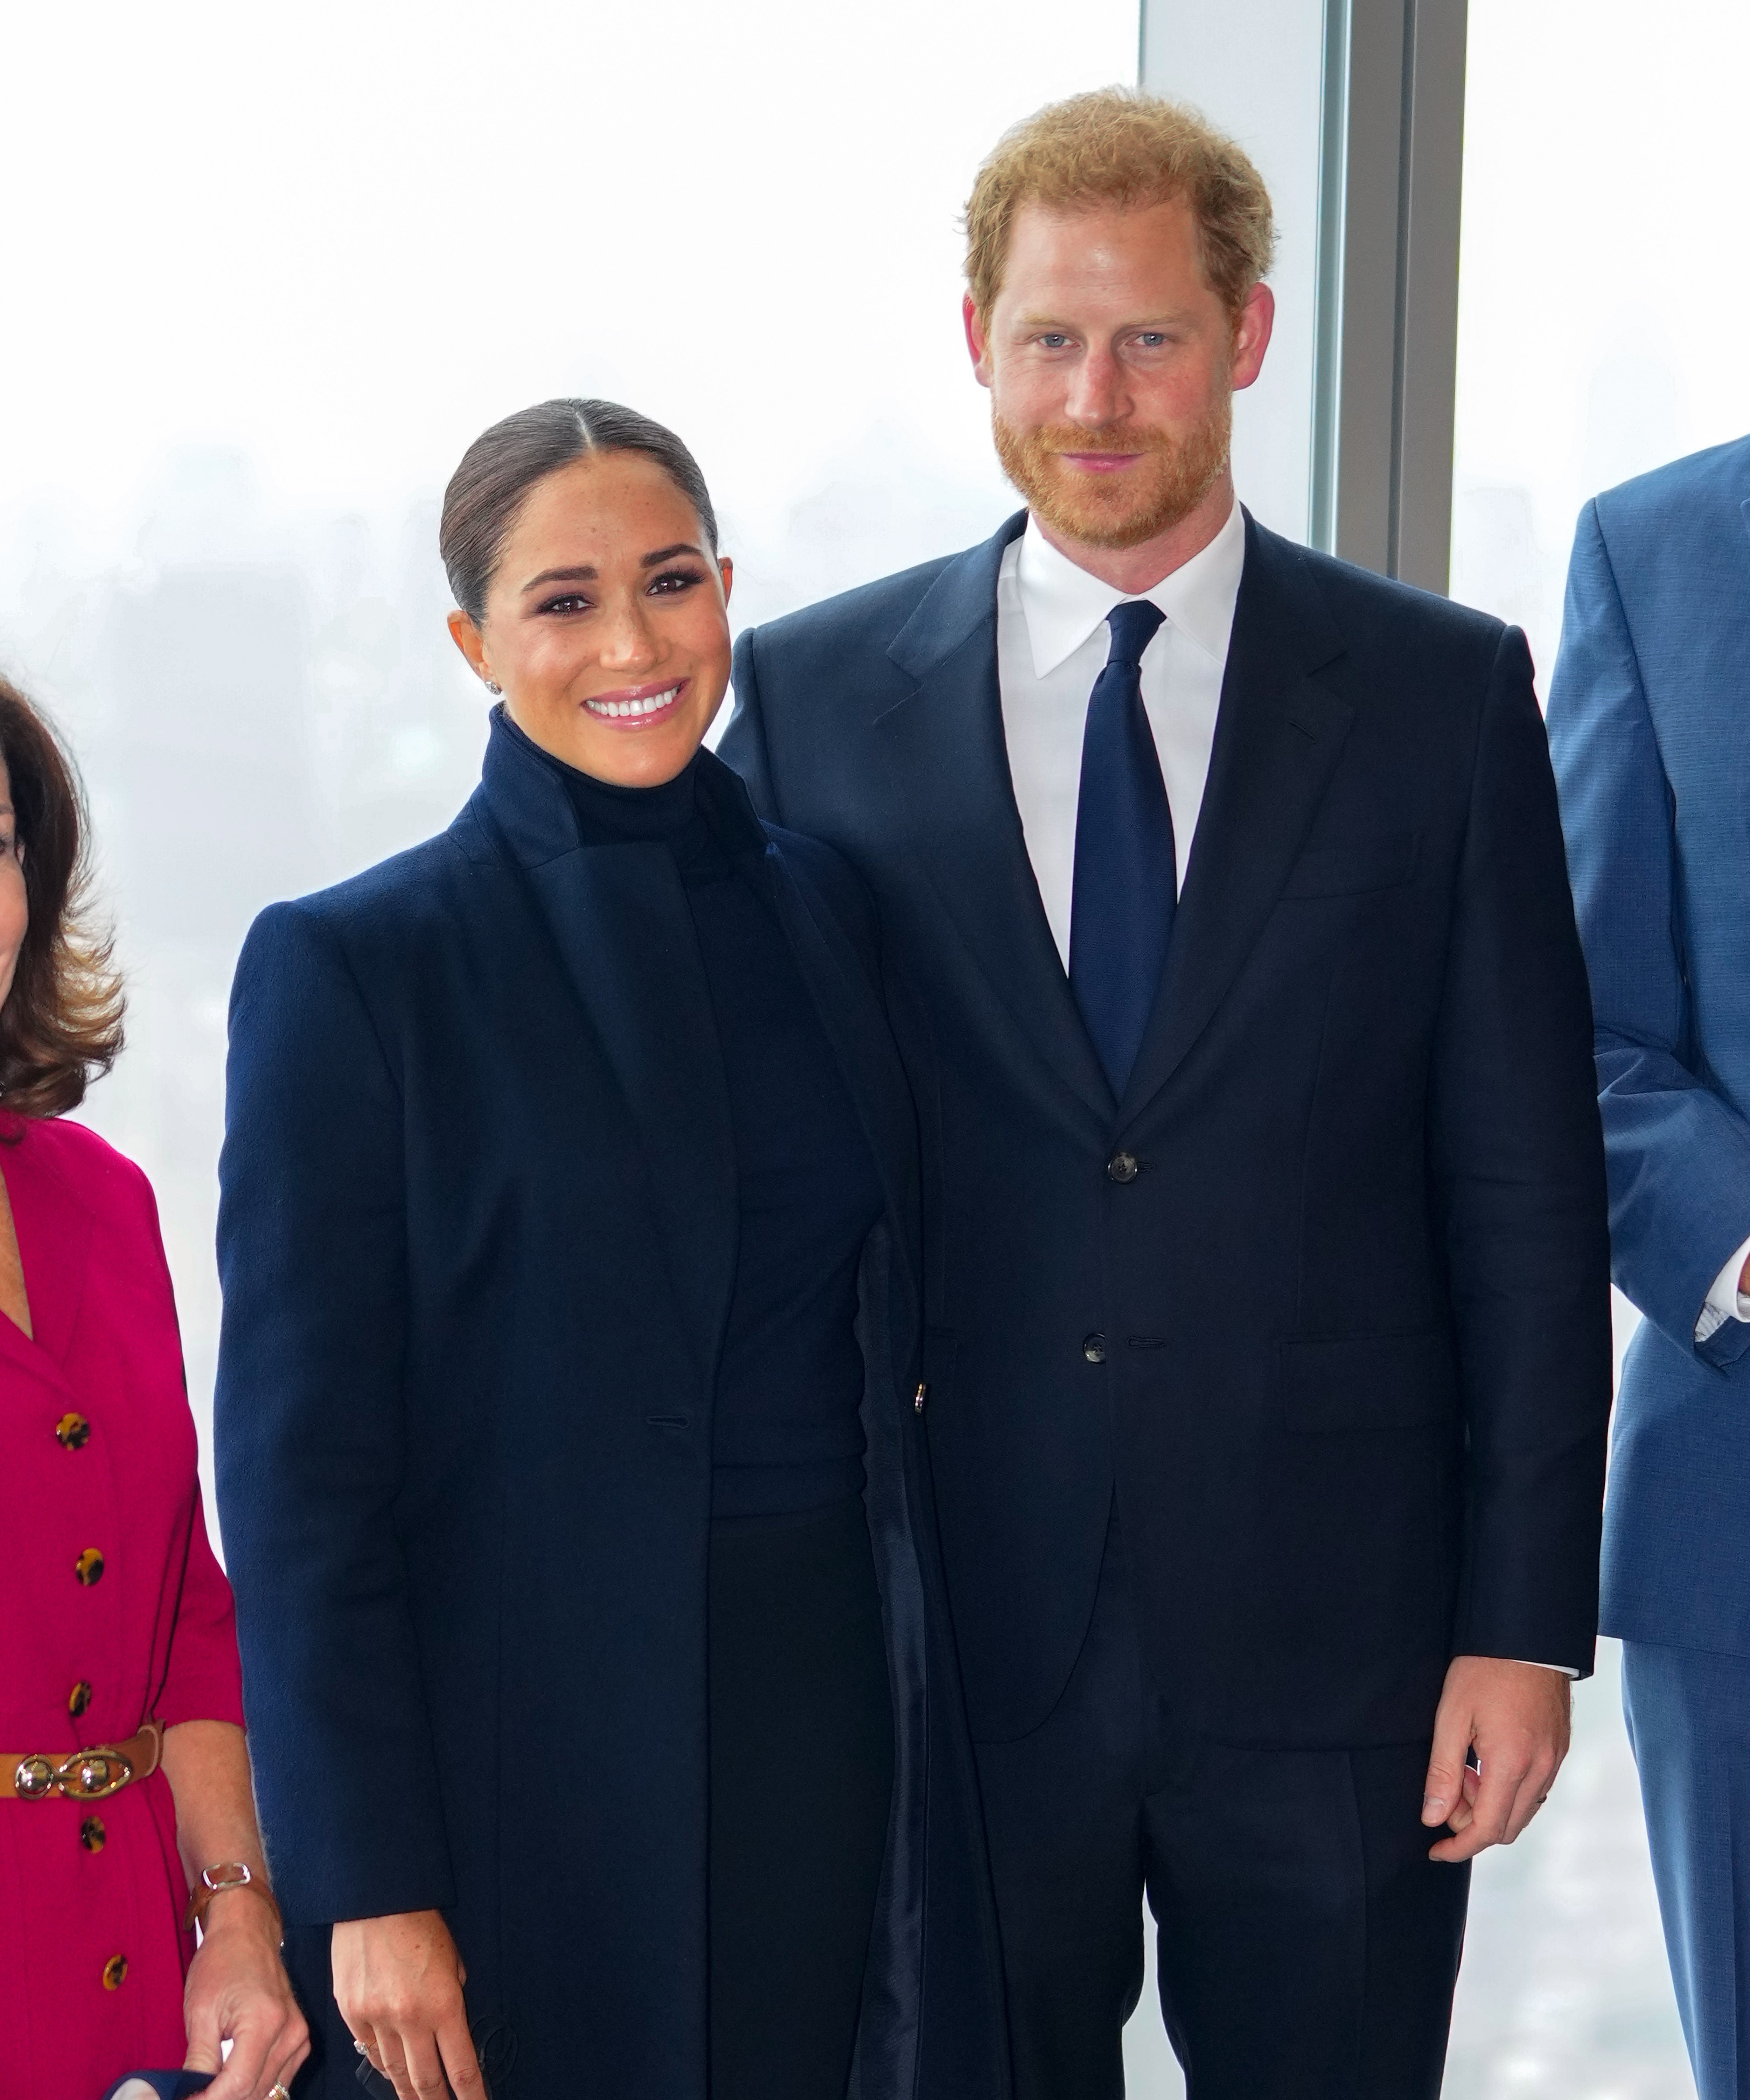 Prince Harry, Duke of Sussex and Meghan, Duchess of Sussex visit 1 World Trade Center on September 23, 2021 in New York City. | Source: Getty Images